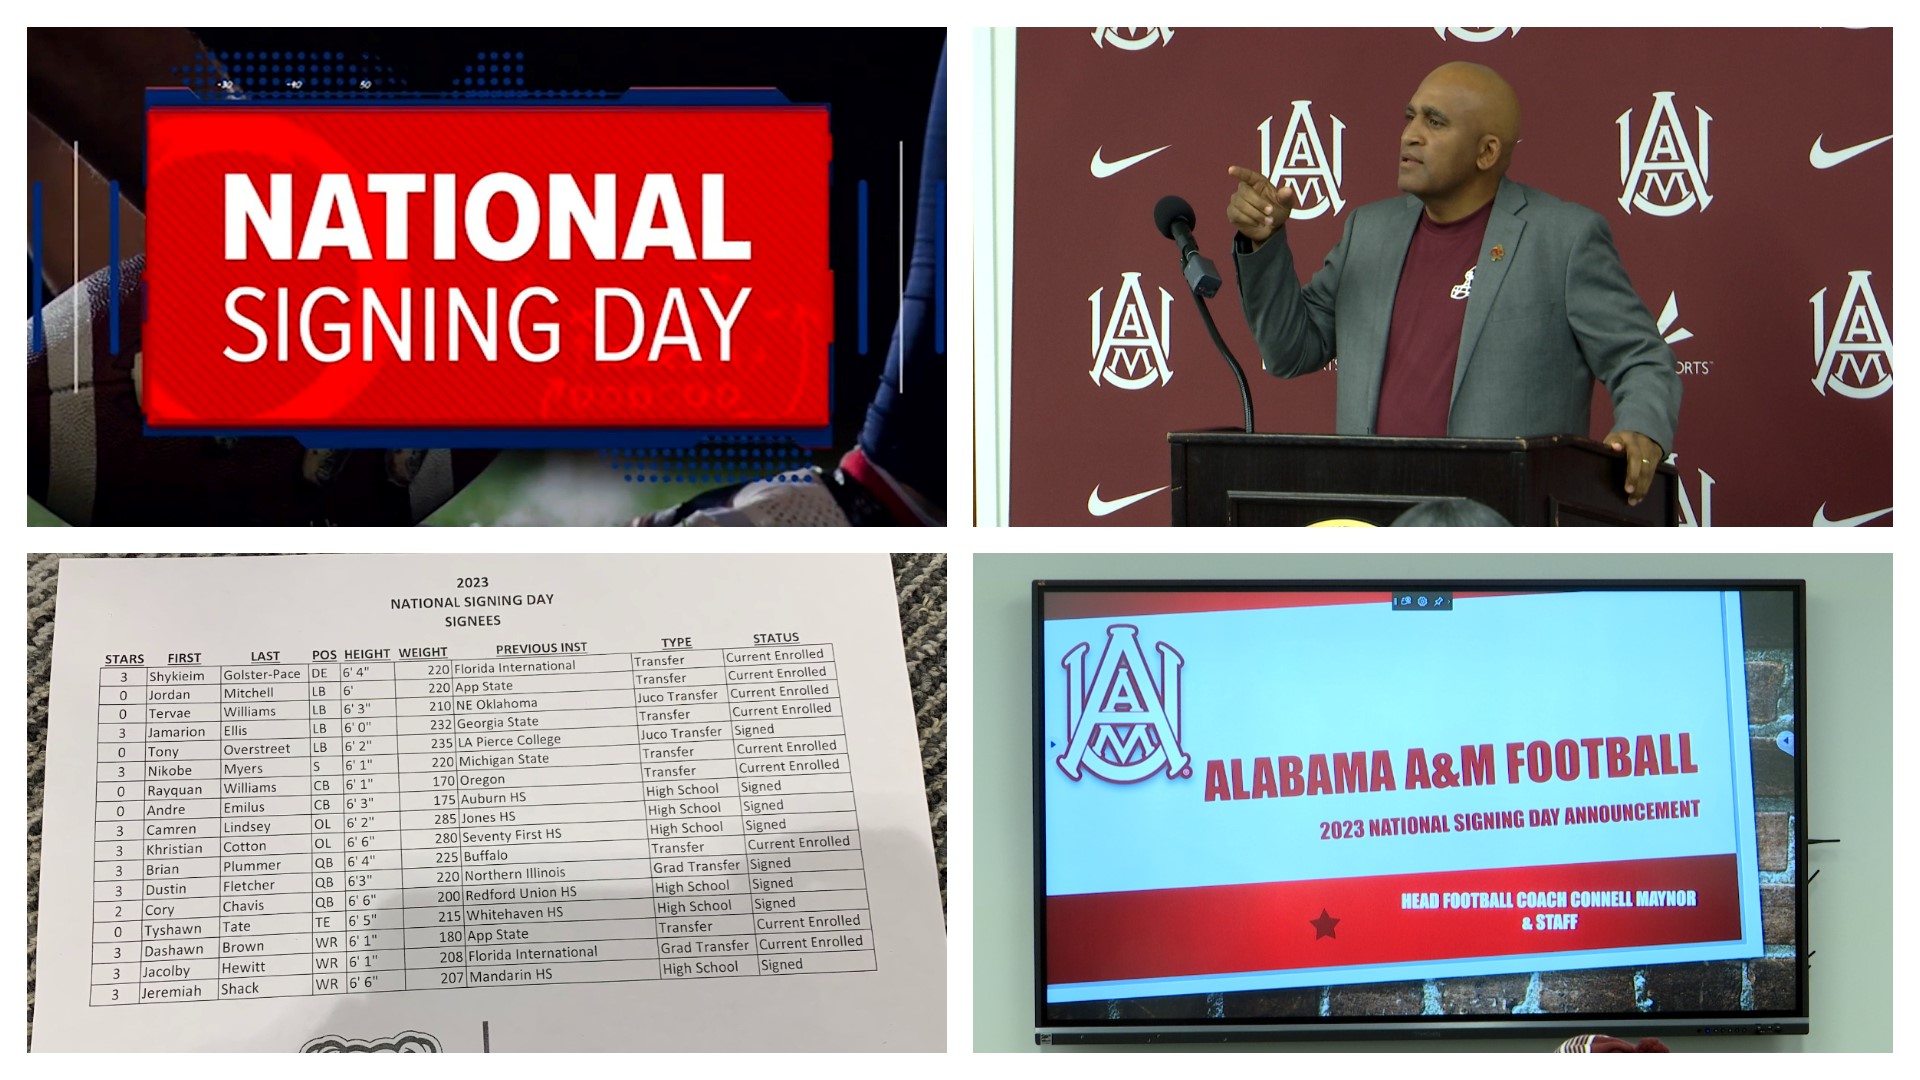 Connell Maynor and his AAMU staff added 17 new players during the 2023 National Signing Day session. Nine of the 17 players are currently enrolled for the spring.